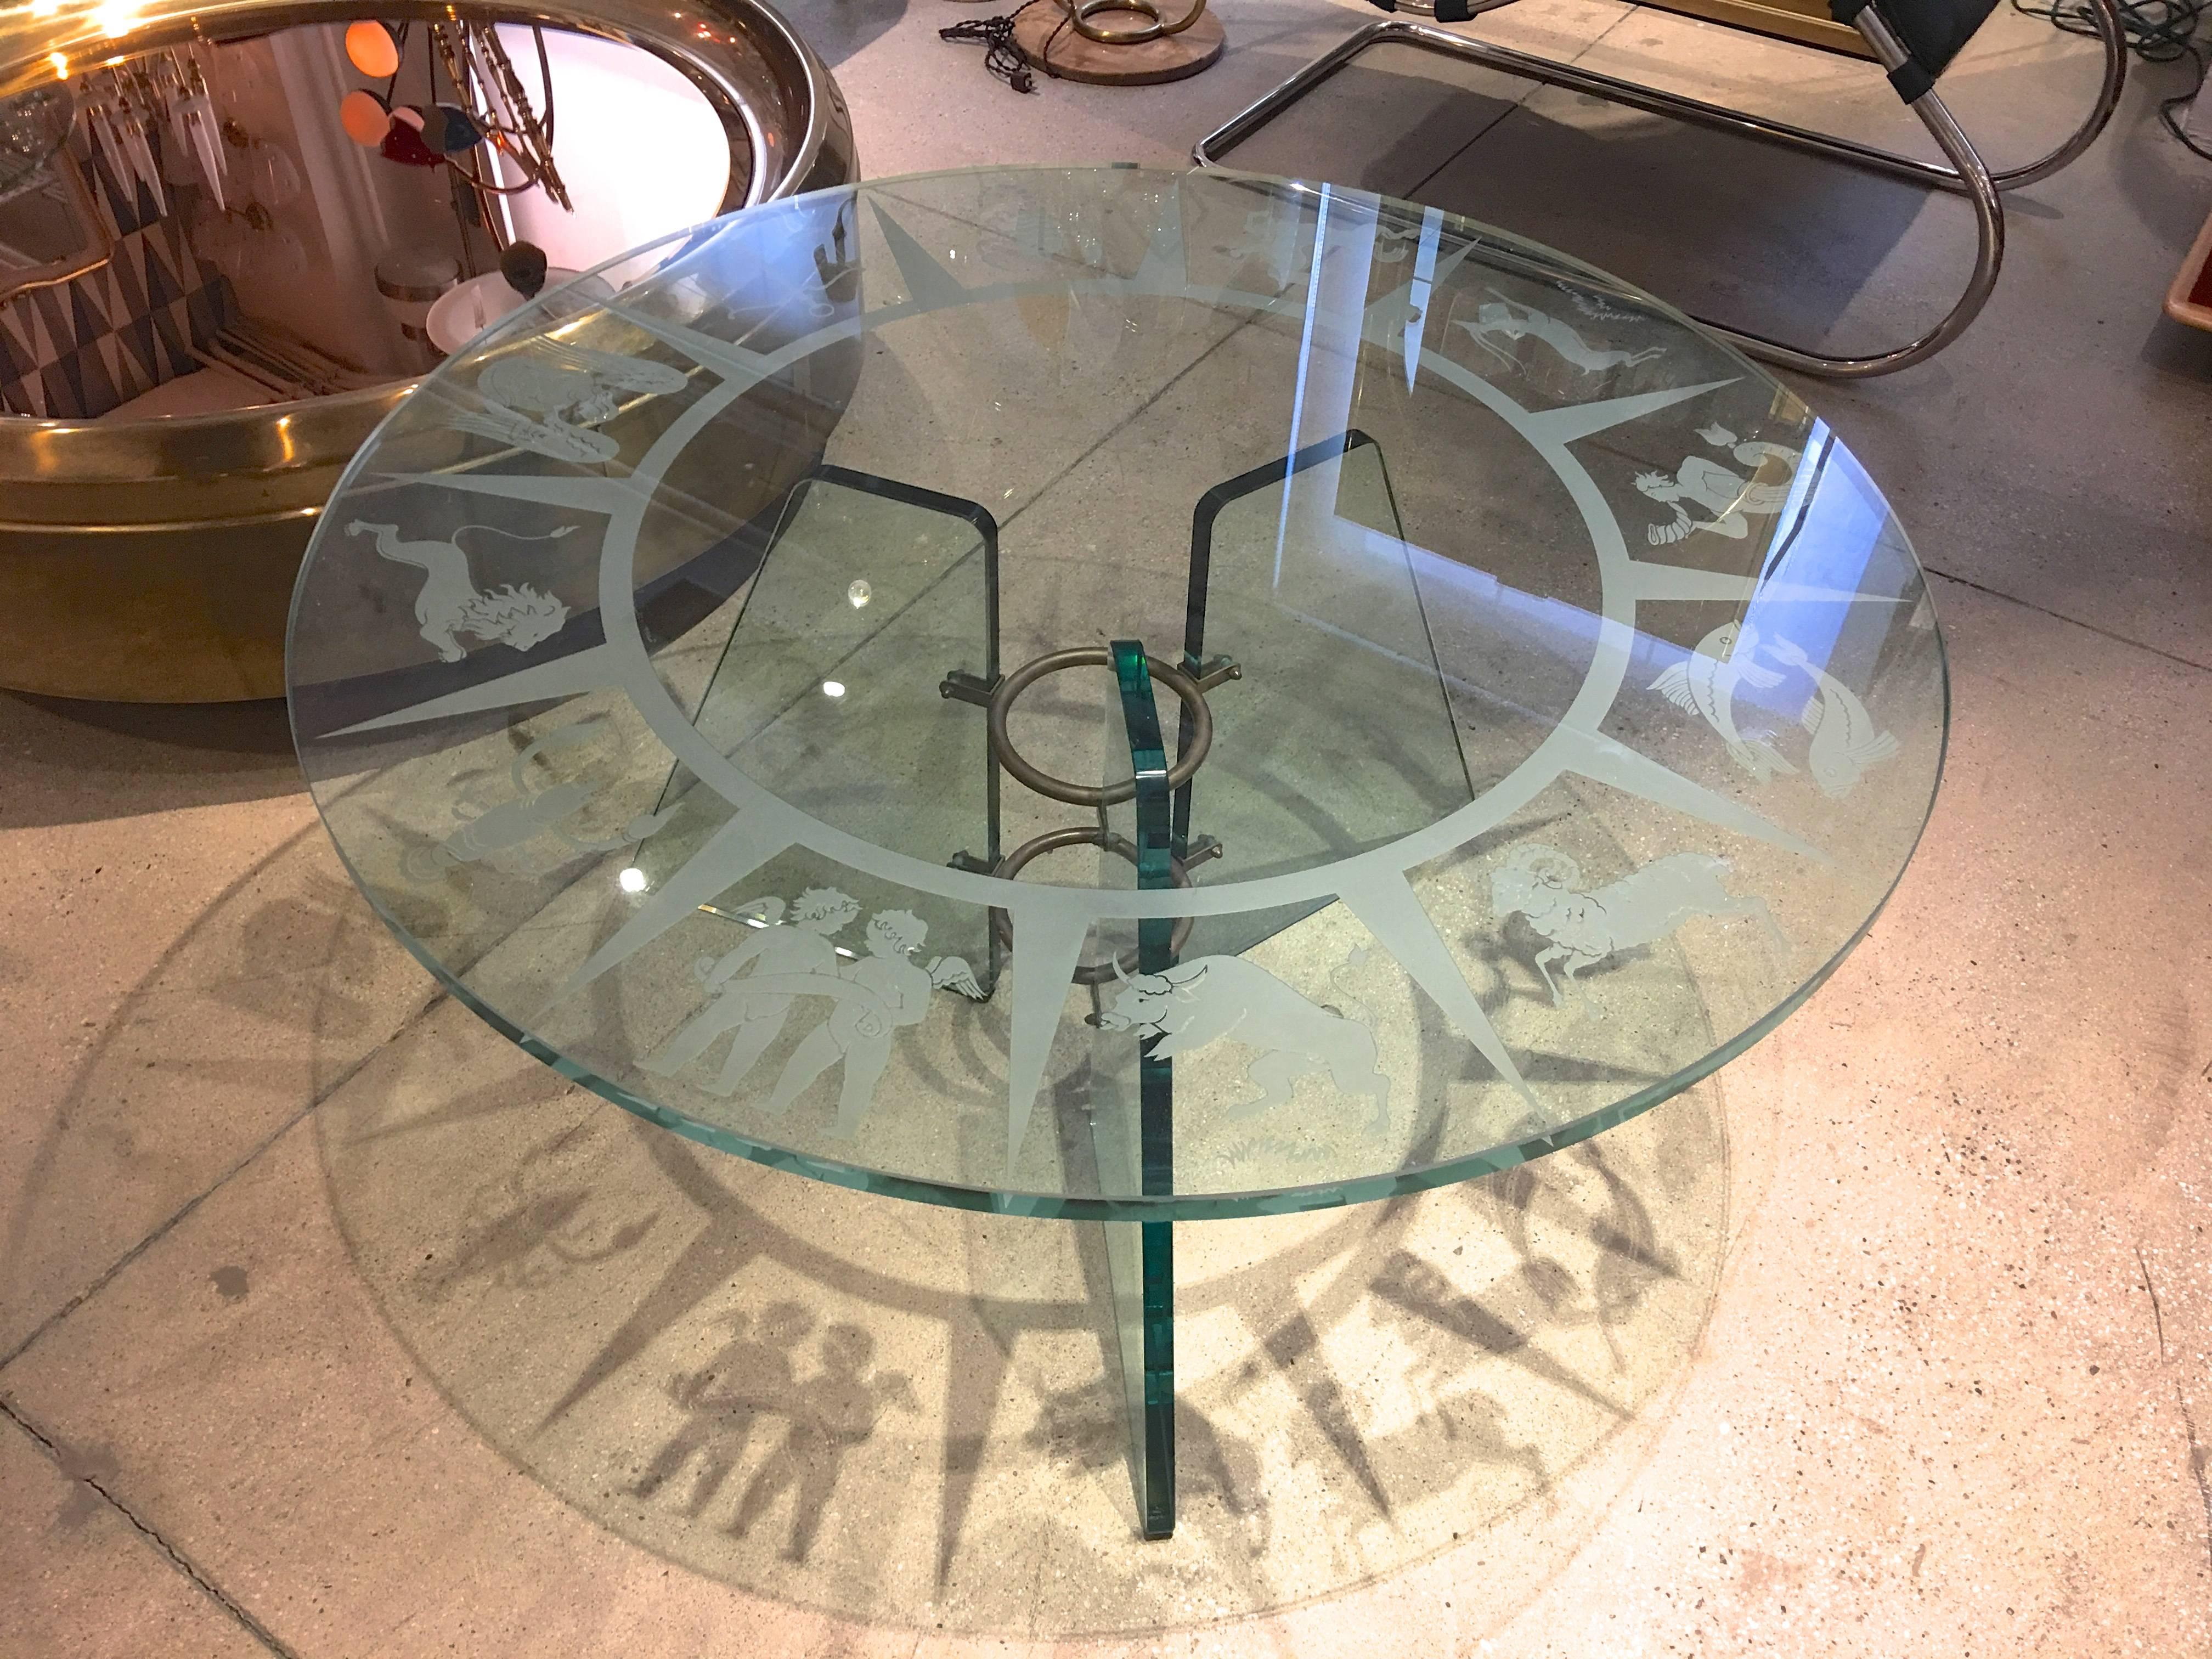 1930s Italian etched glass table attributed to Pietro Chiesa for Fontana Arte.

39 inch diameter glass top deeply engraved and etched with stylized Italian Art Deco zodiacal figures.

Base is comprised of three 20 inch high irregular quadrilateral